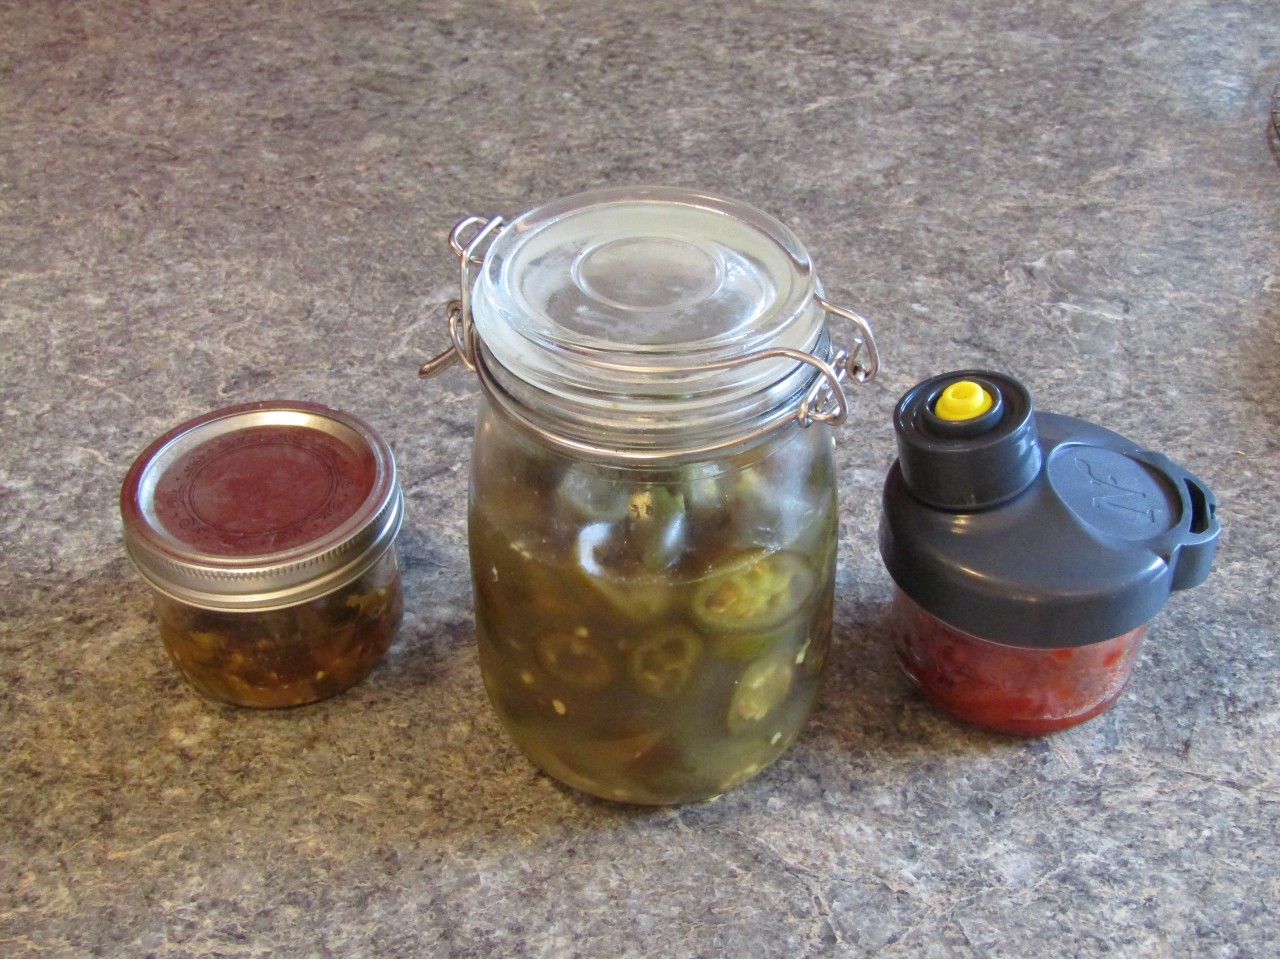 Three differnet types of fermented peppers in three different containers